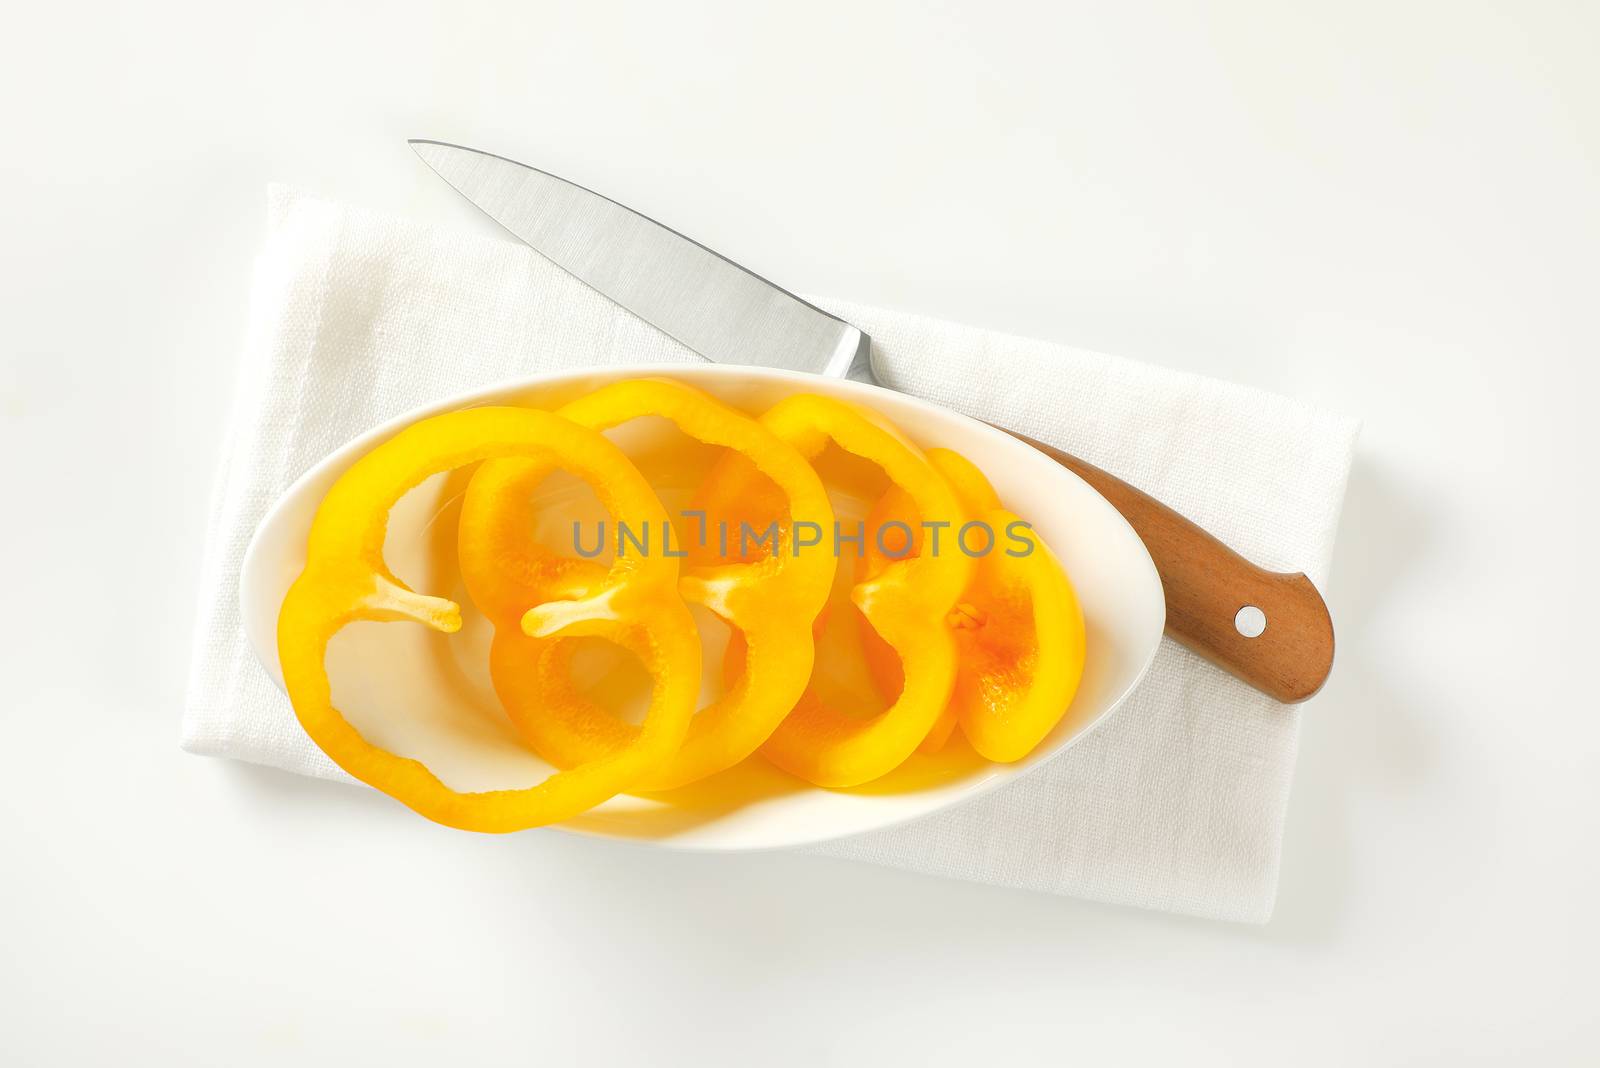 Sliced yellow bell pepper in white bowl and kitchen knife next to it